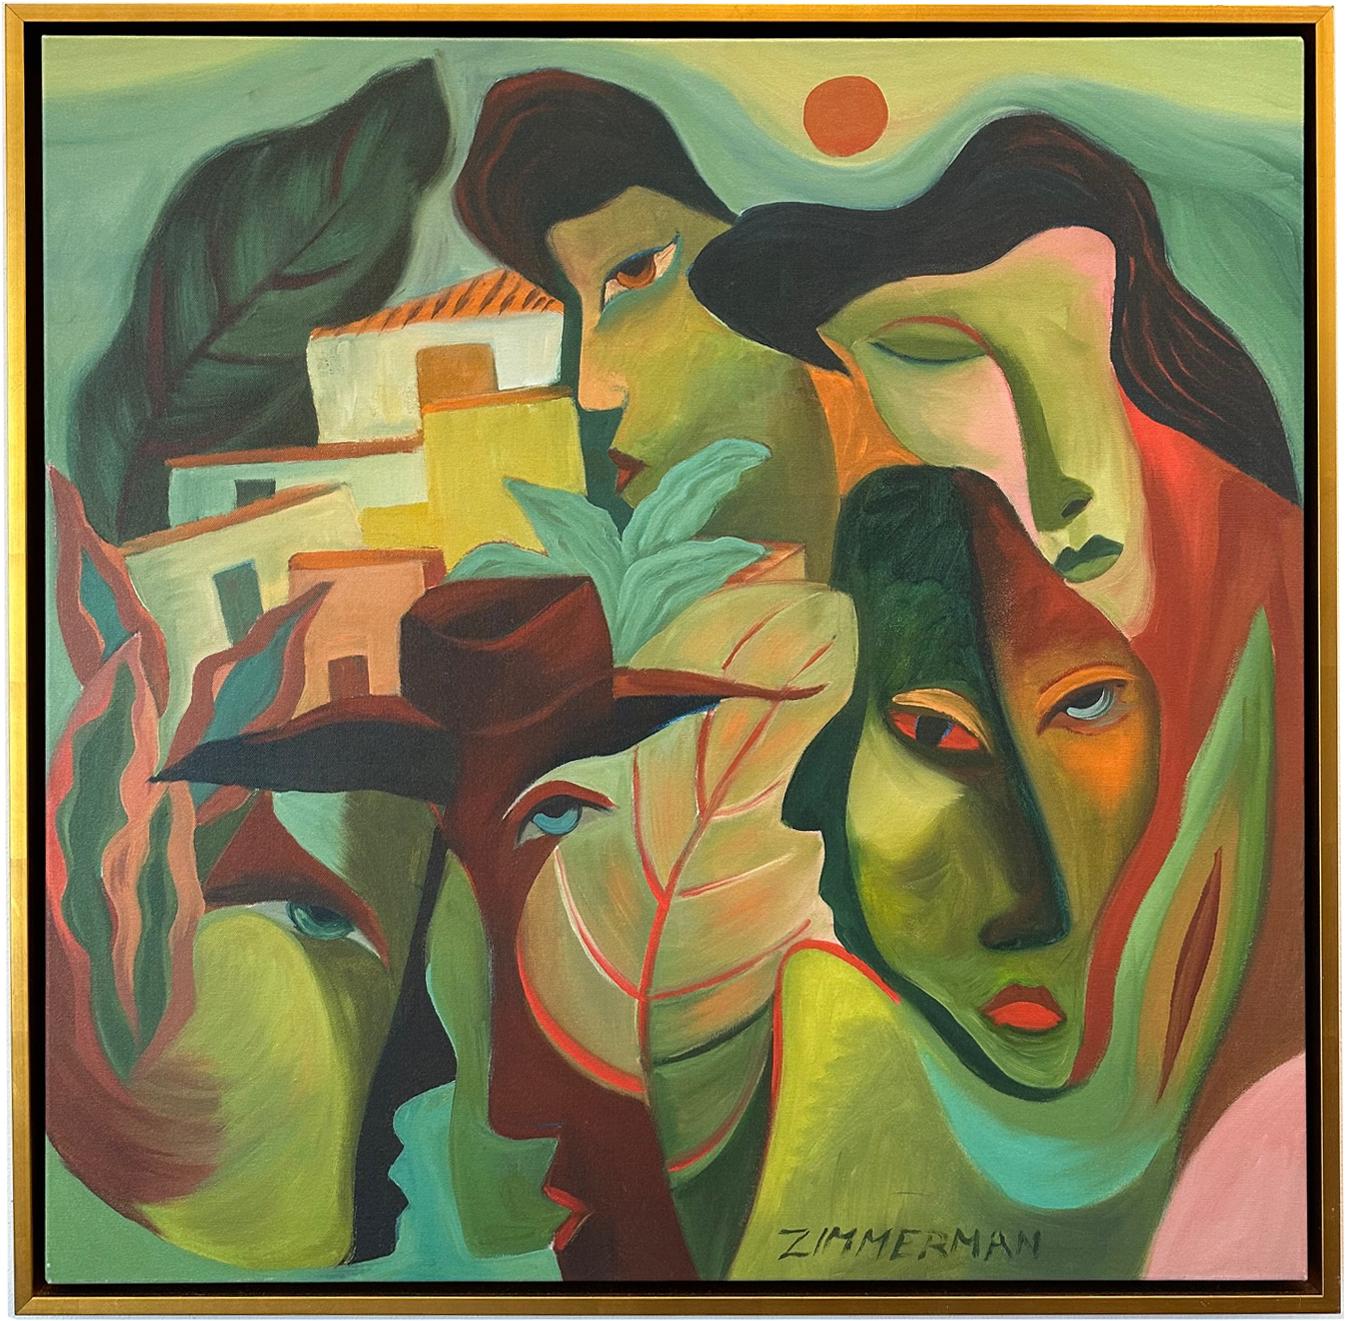 Relationships - Giclee Print by Marc Zimmerman

This masterpiece is exhibited in the Zimmerman Gallery, Carmel CA.

ABOUT THE ARTIST
Marc Zimmerman is a visionary artist whose creations embody a captivating blend of playfulness and depth. With his